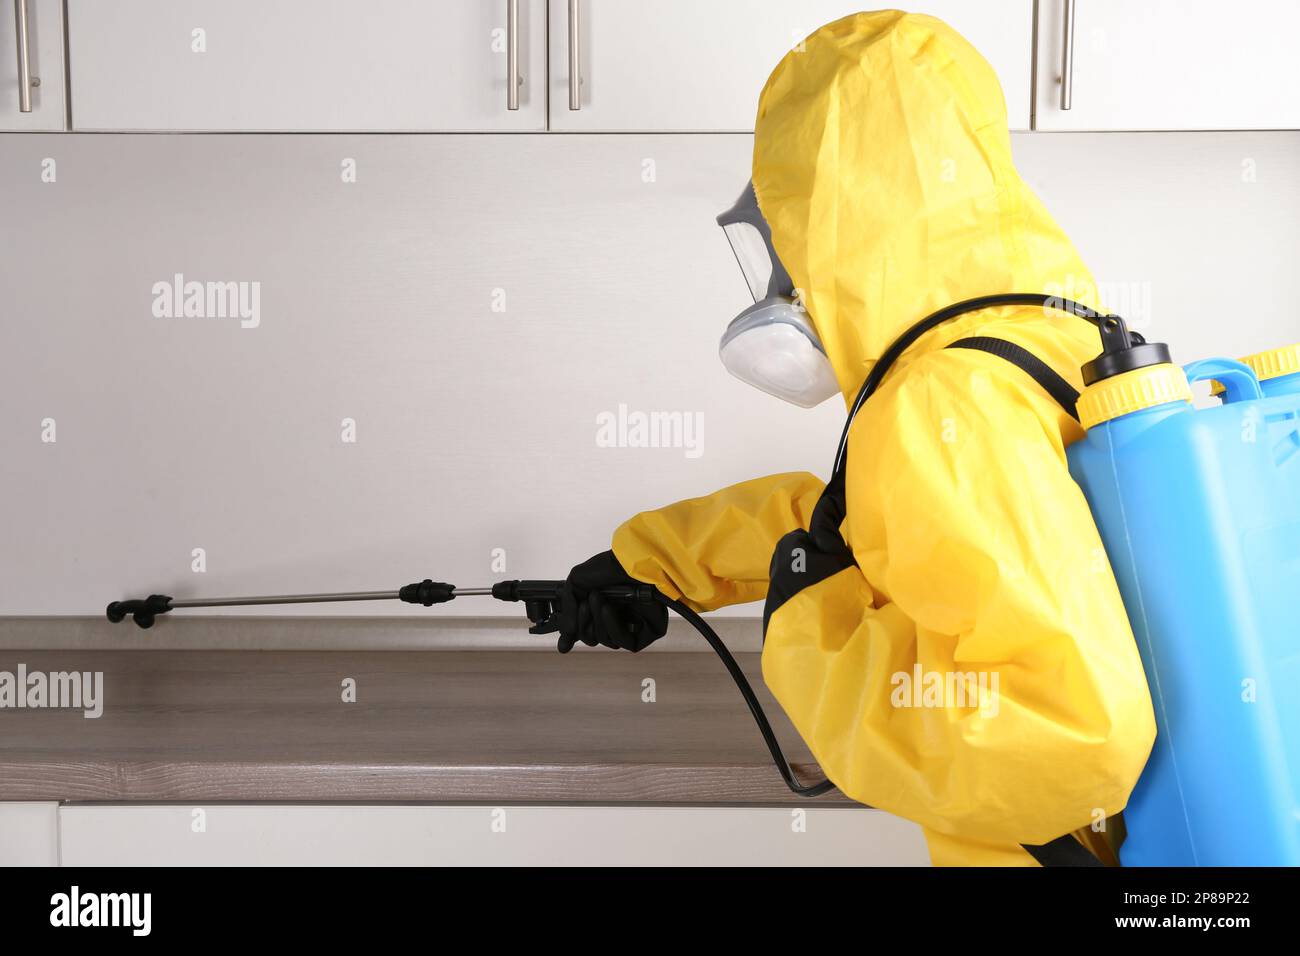 Pest control worker spraying pesticide in kitchen Stock Photo